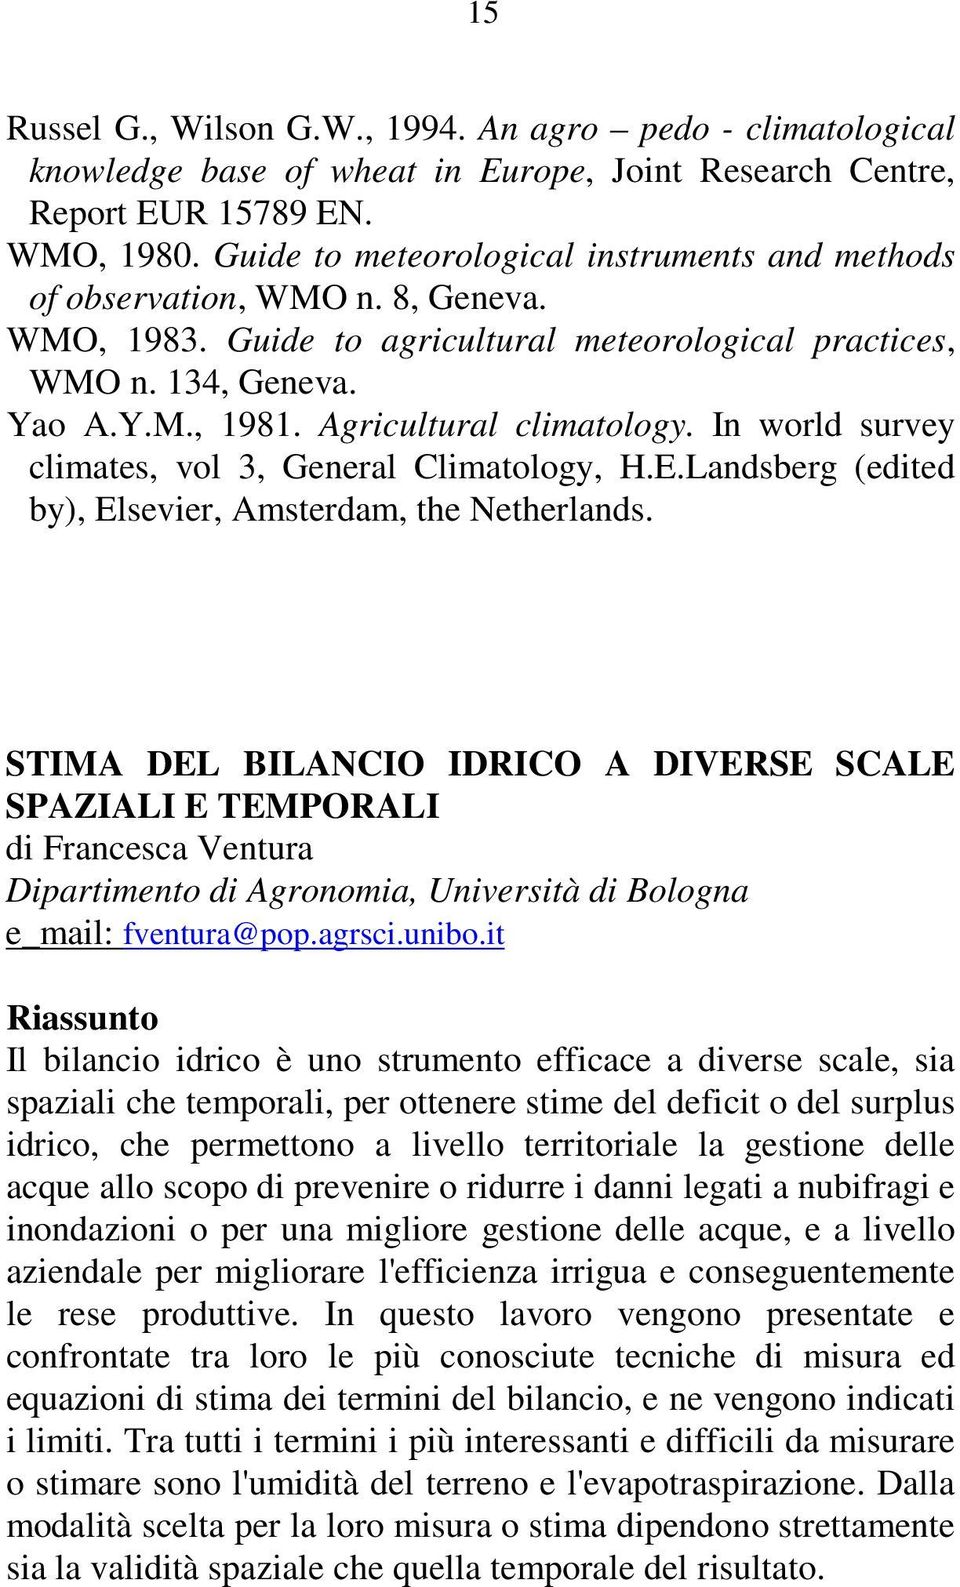 Agricultural climatology. In world survey climates, vol 3, General Climatology, H.E.Landsberg (edited by), Elsevier, Amsterdam, the Netherlands.